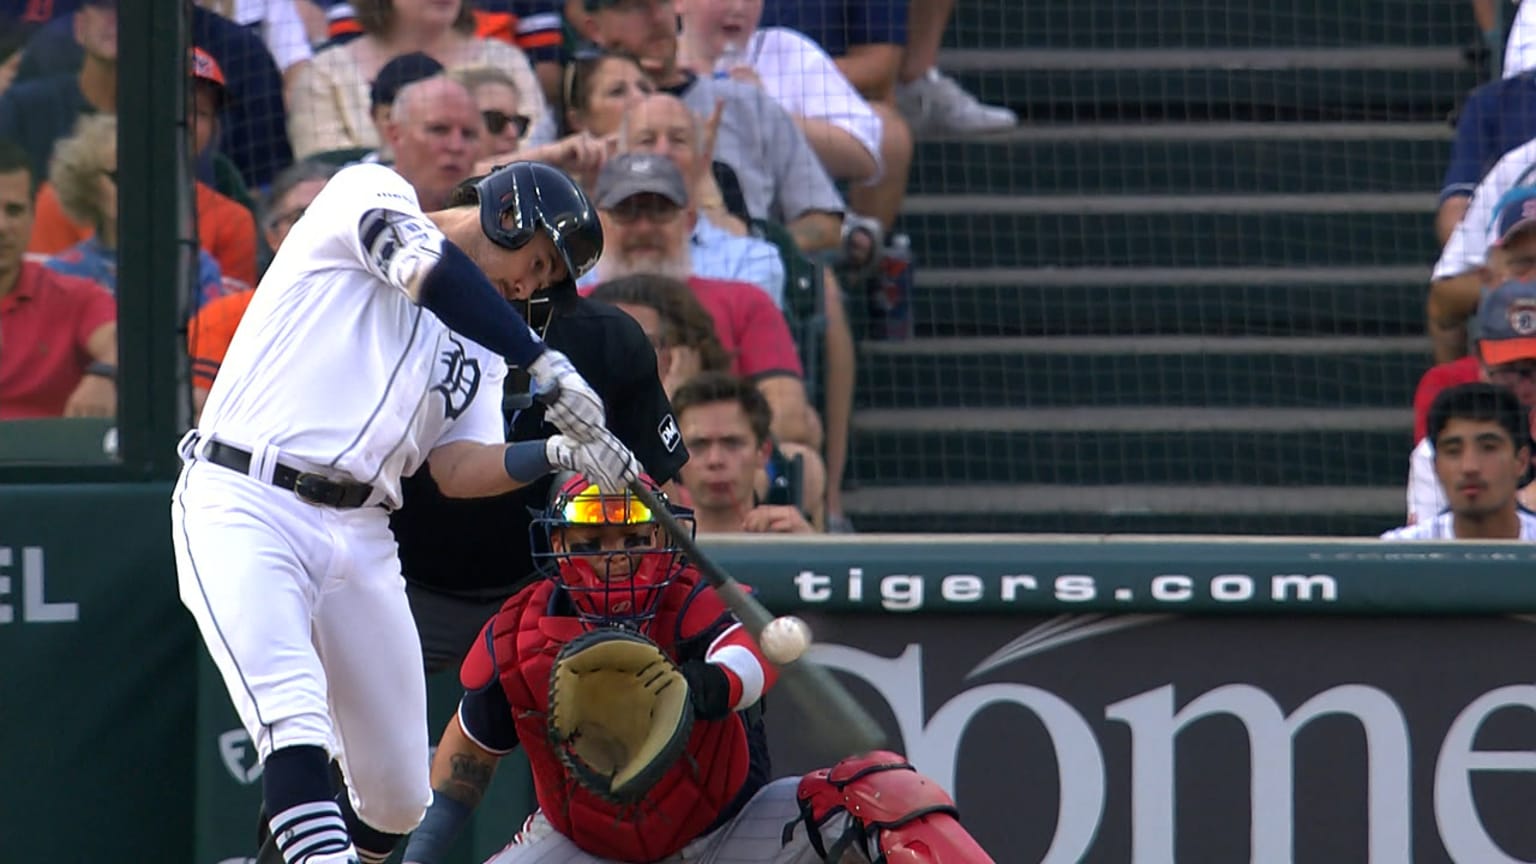 Zach McKinstry's 3 hits lead Tigers past White Sox